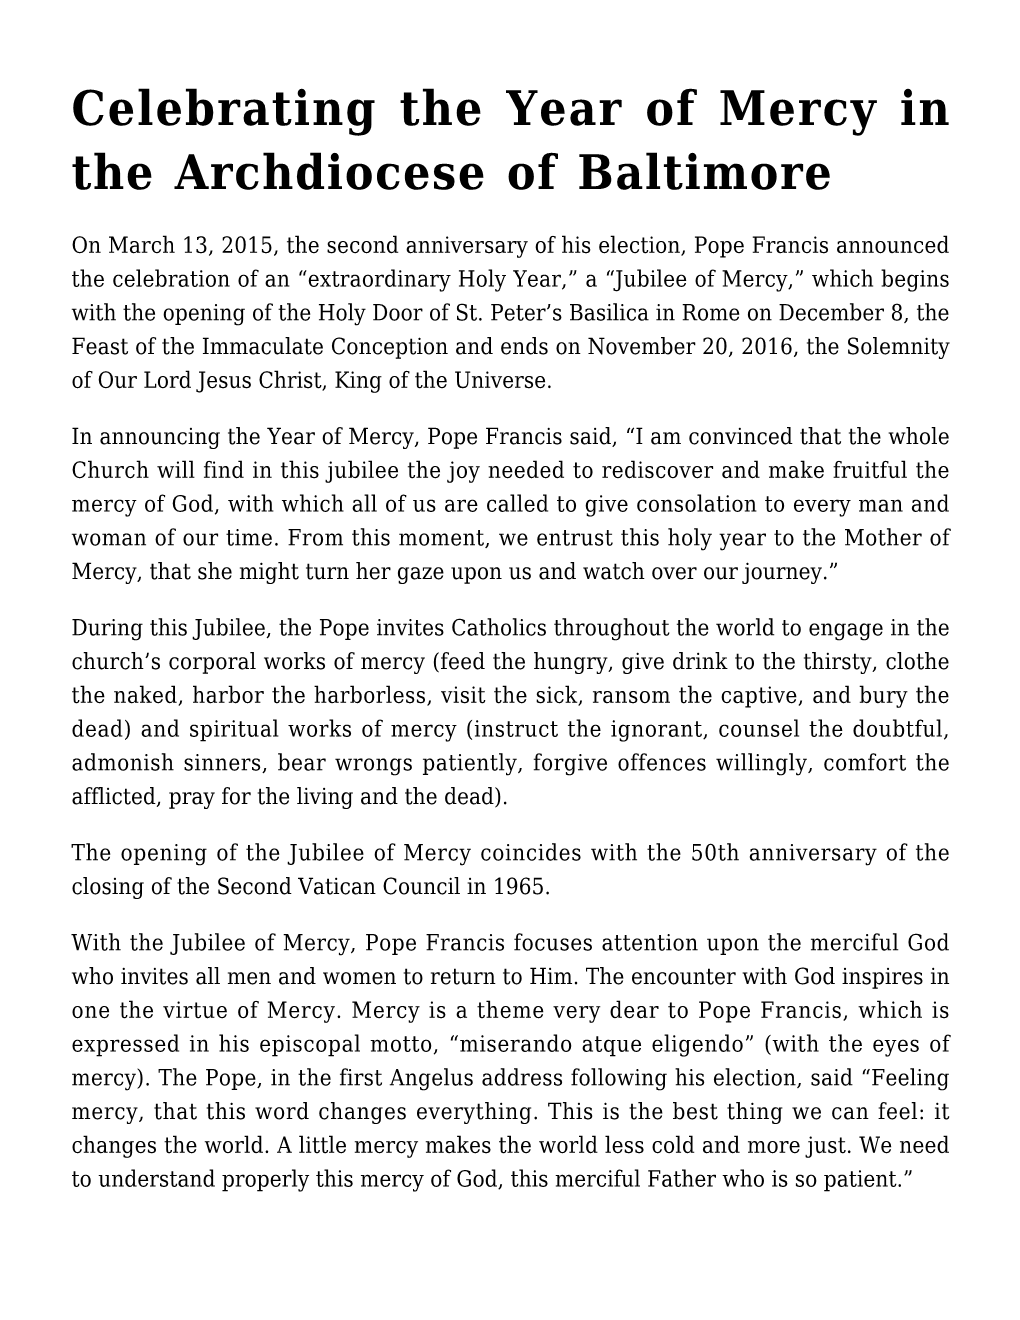 Celebrating the Year of Mercy in the Archdiocese of Baltimore